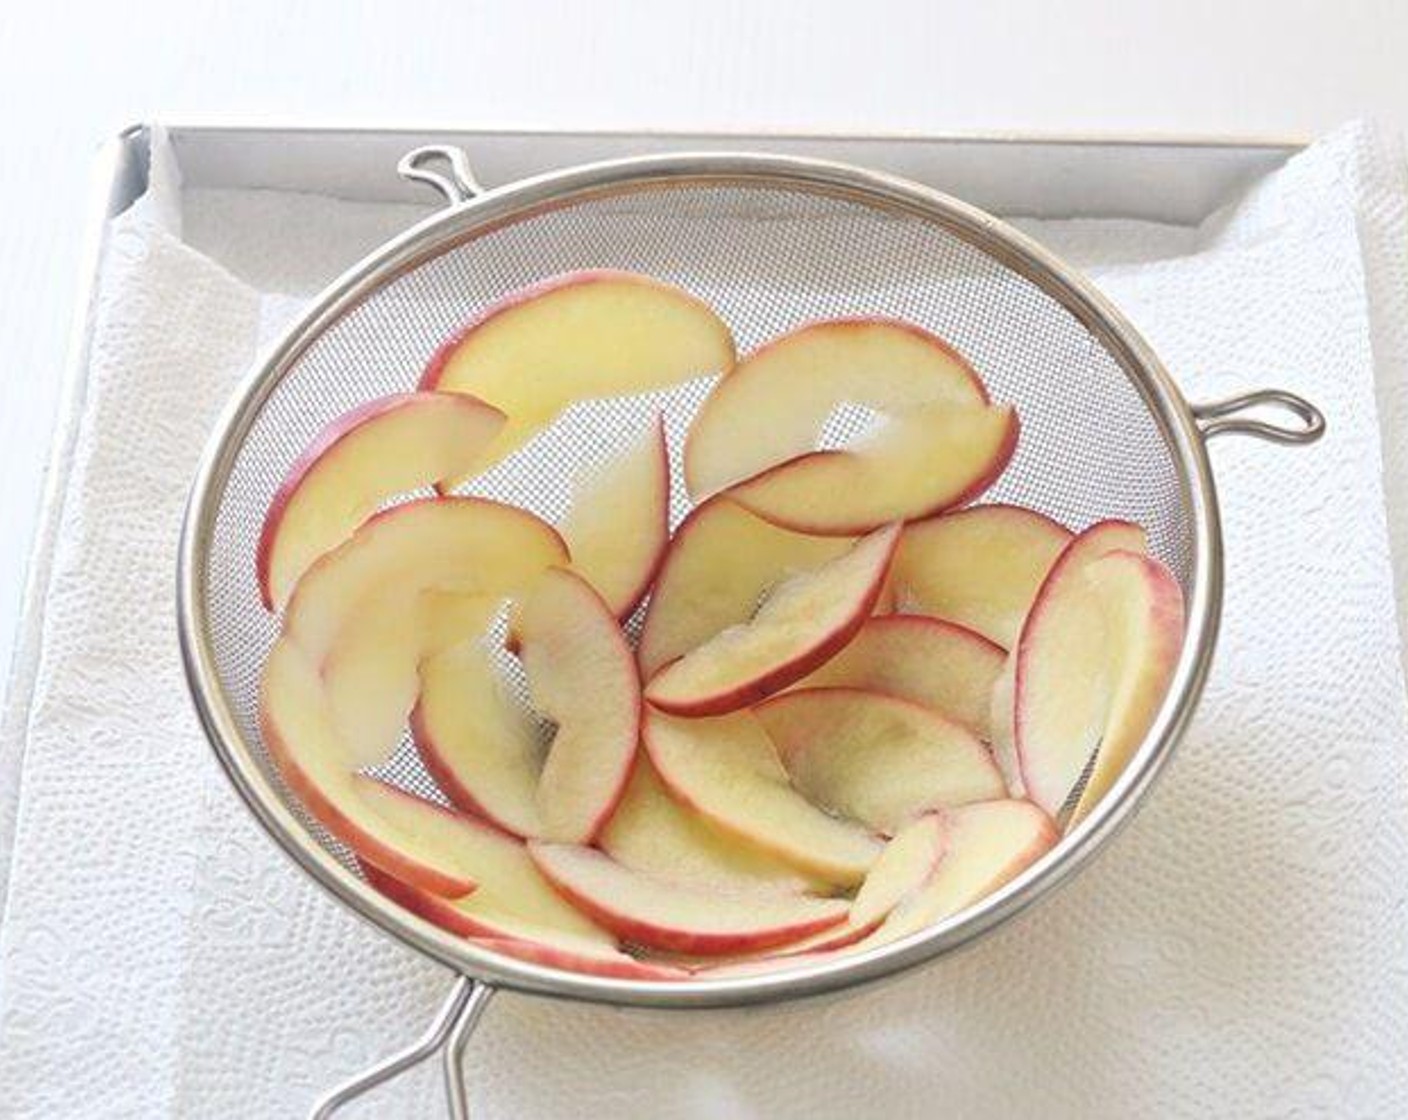 step 4 Drain the apple slices and dry them with kitchen towel.